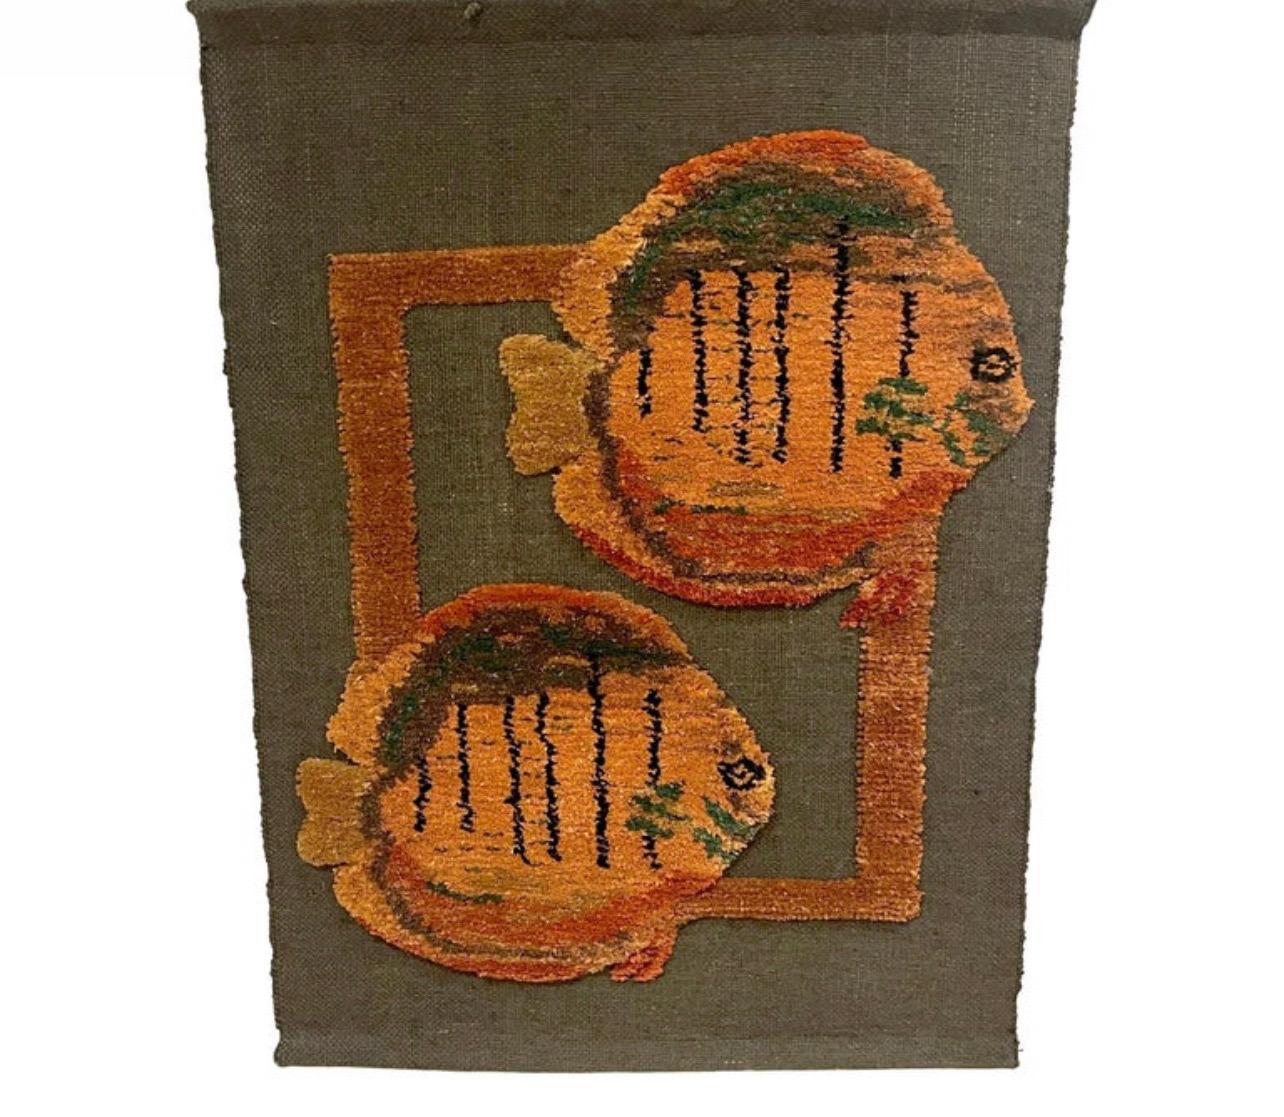 Mid Century Woven Fish Motif Tapestry by Tom Taylor, 1990
USA, 1990
This mid-century woven tapestry by Tom Taylor, created in 1990, is a great piece of fiber art from the later 20th century. It features a sleek dual fish motif and is made using